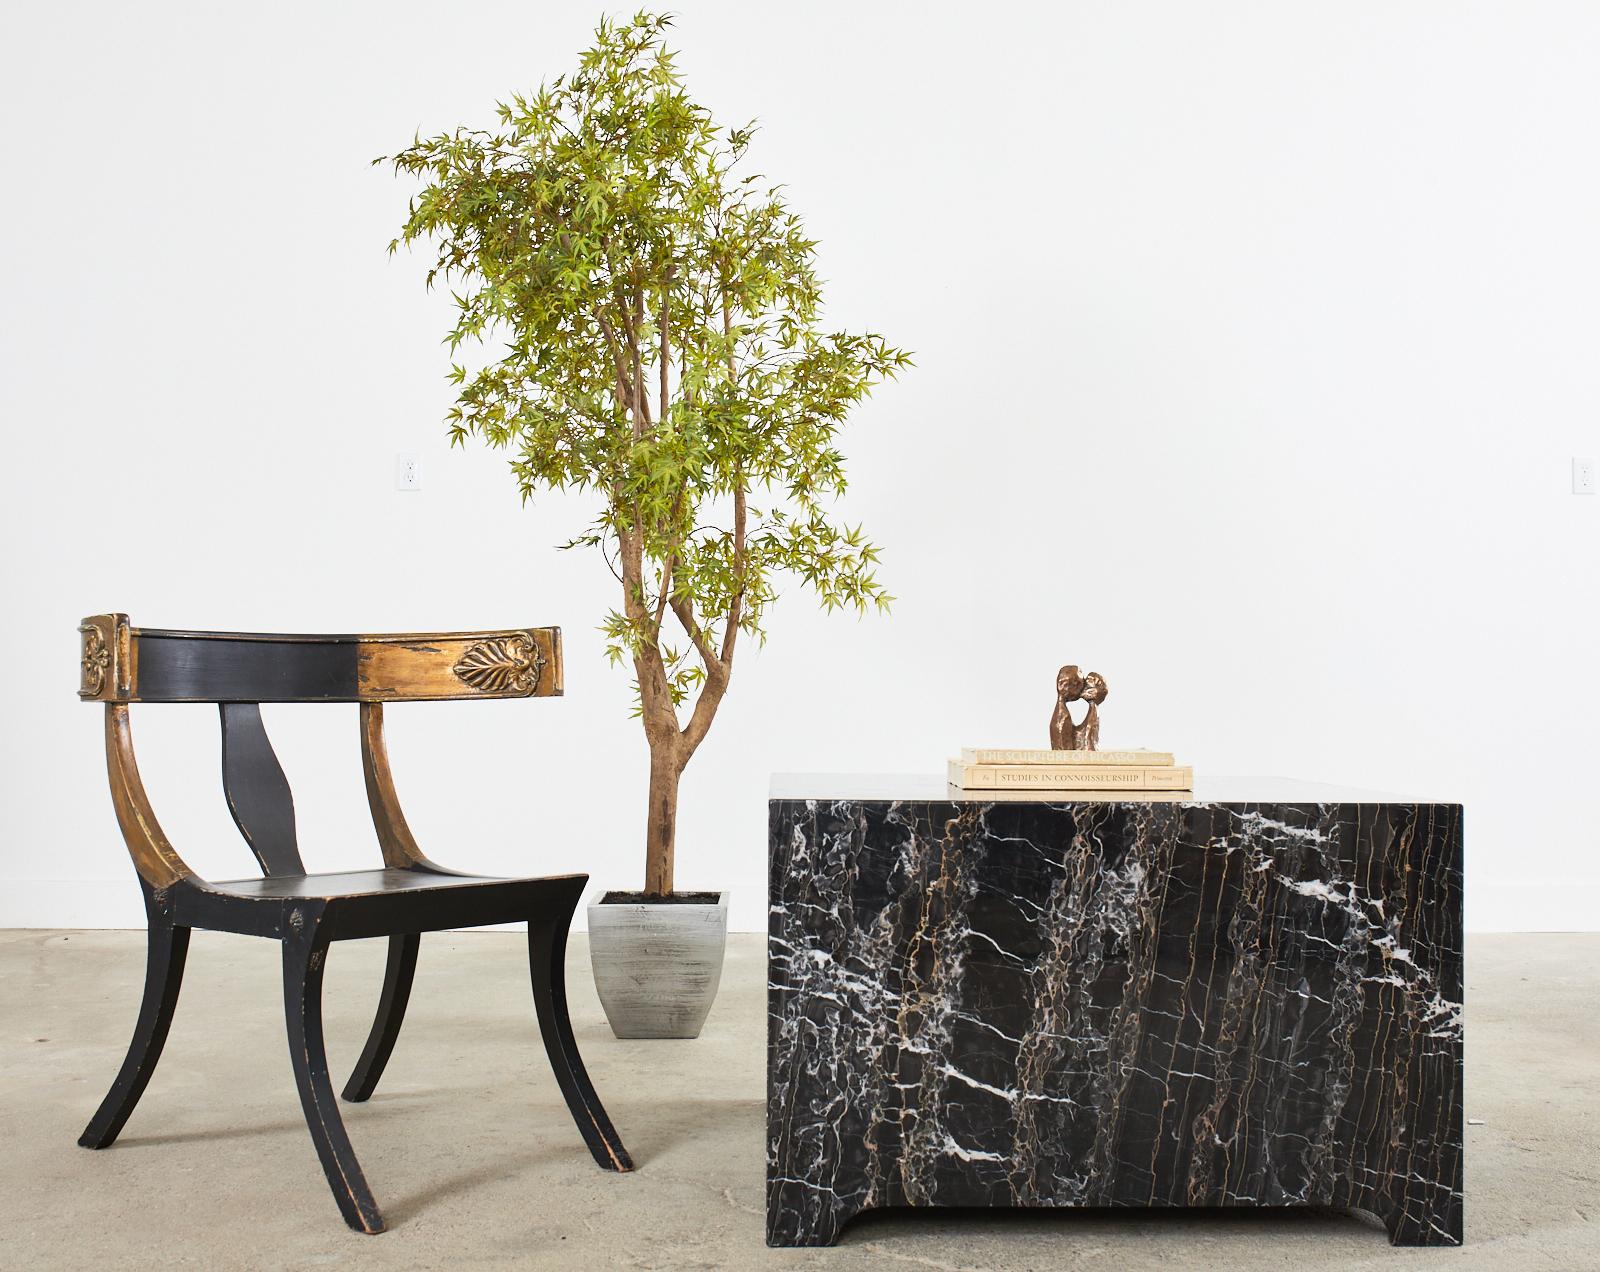 Dramatic pair of black square block coffee, cocktail, or center tables with a variegated finish. The tables appear as two solid blocks with smooth edges and polished finishes. The marble is variegated with intricate gilt, bronze, grey, and white